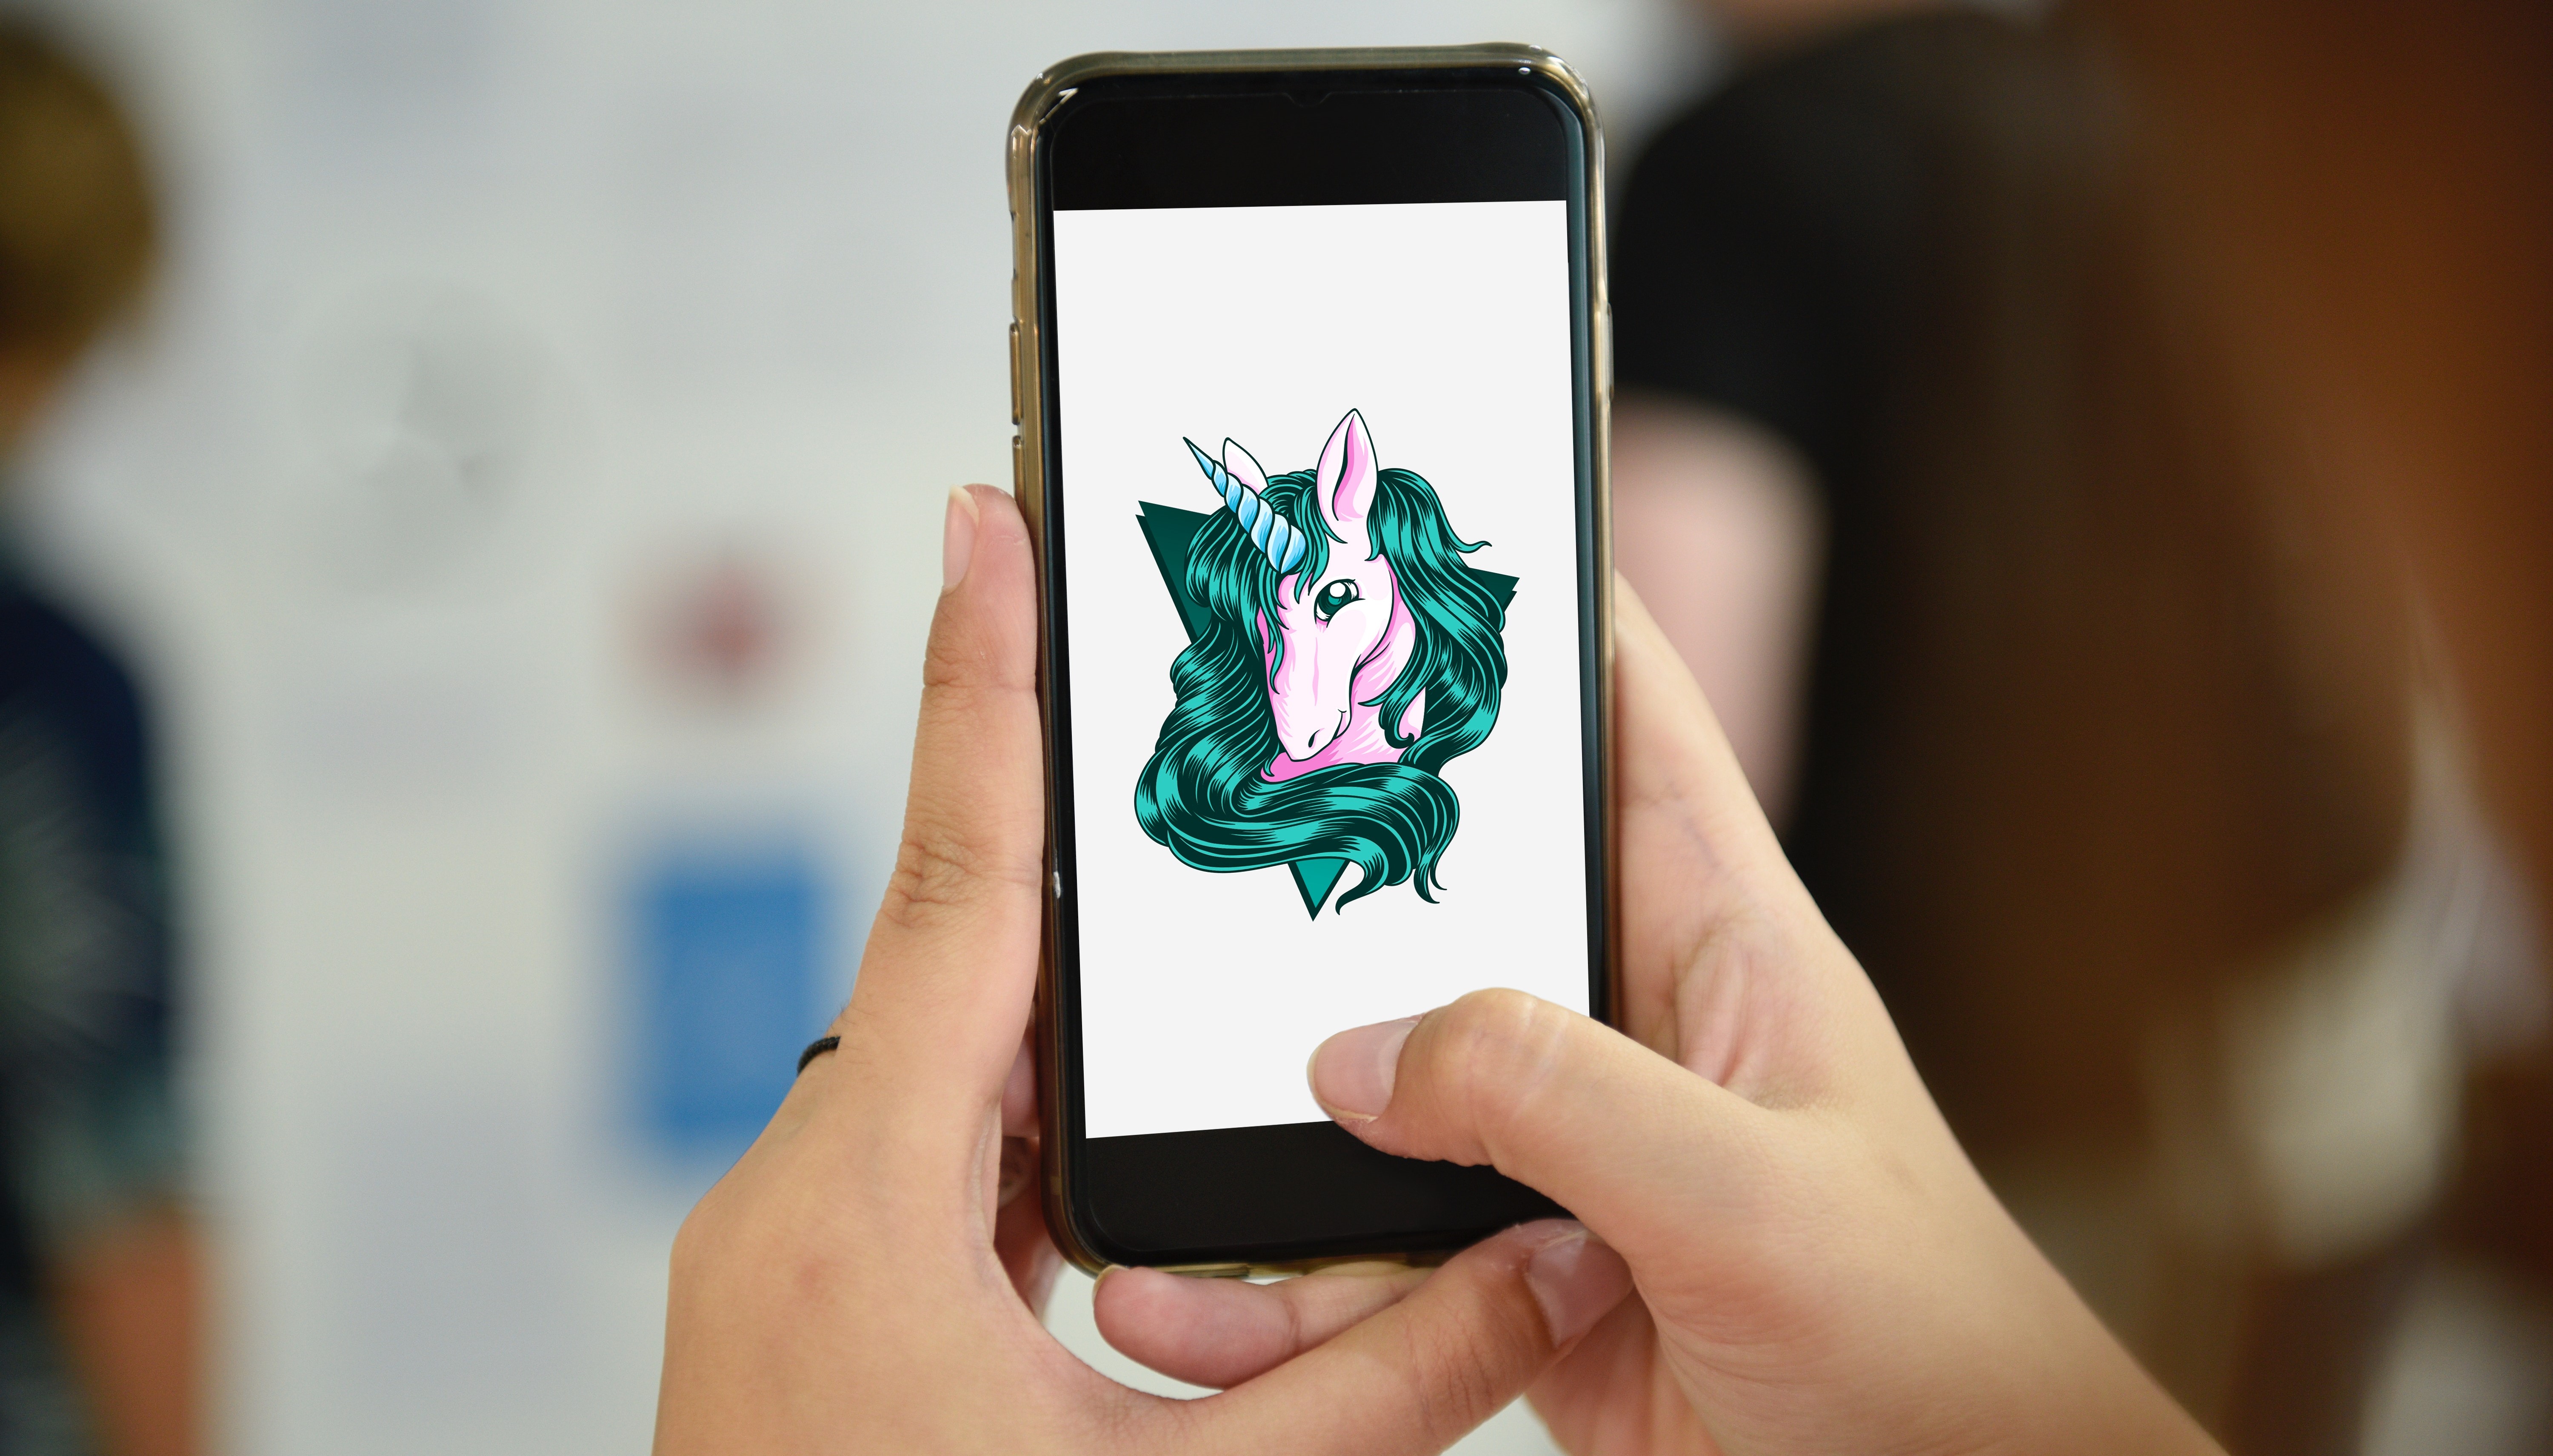 Photograph of two hands holding a phone with an illustration of a pastel pink unicorn's head with a green mane and pale blue horn, on a white background.